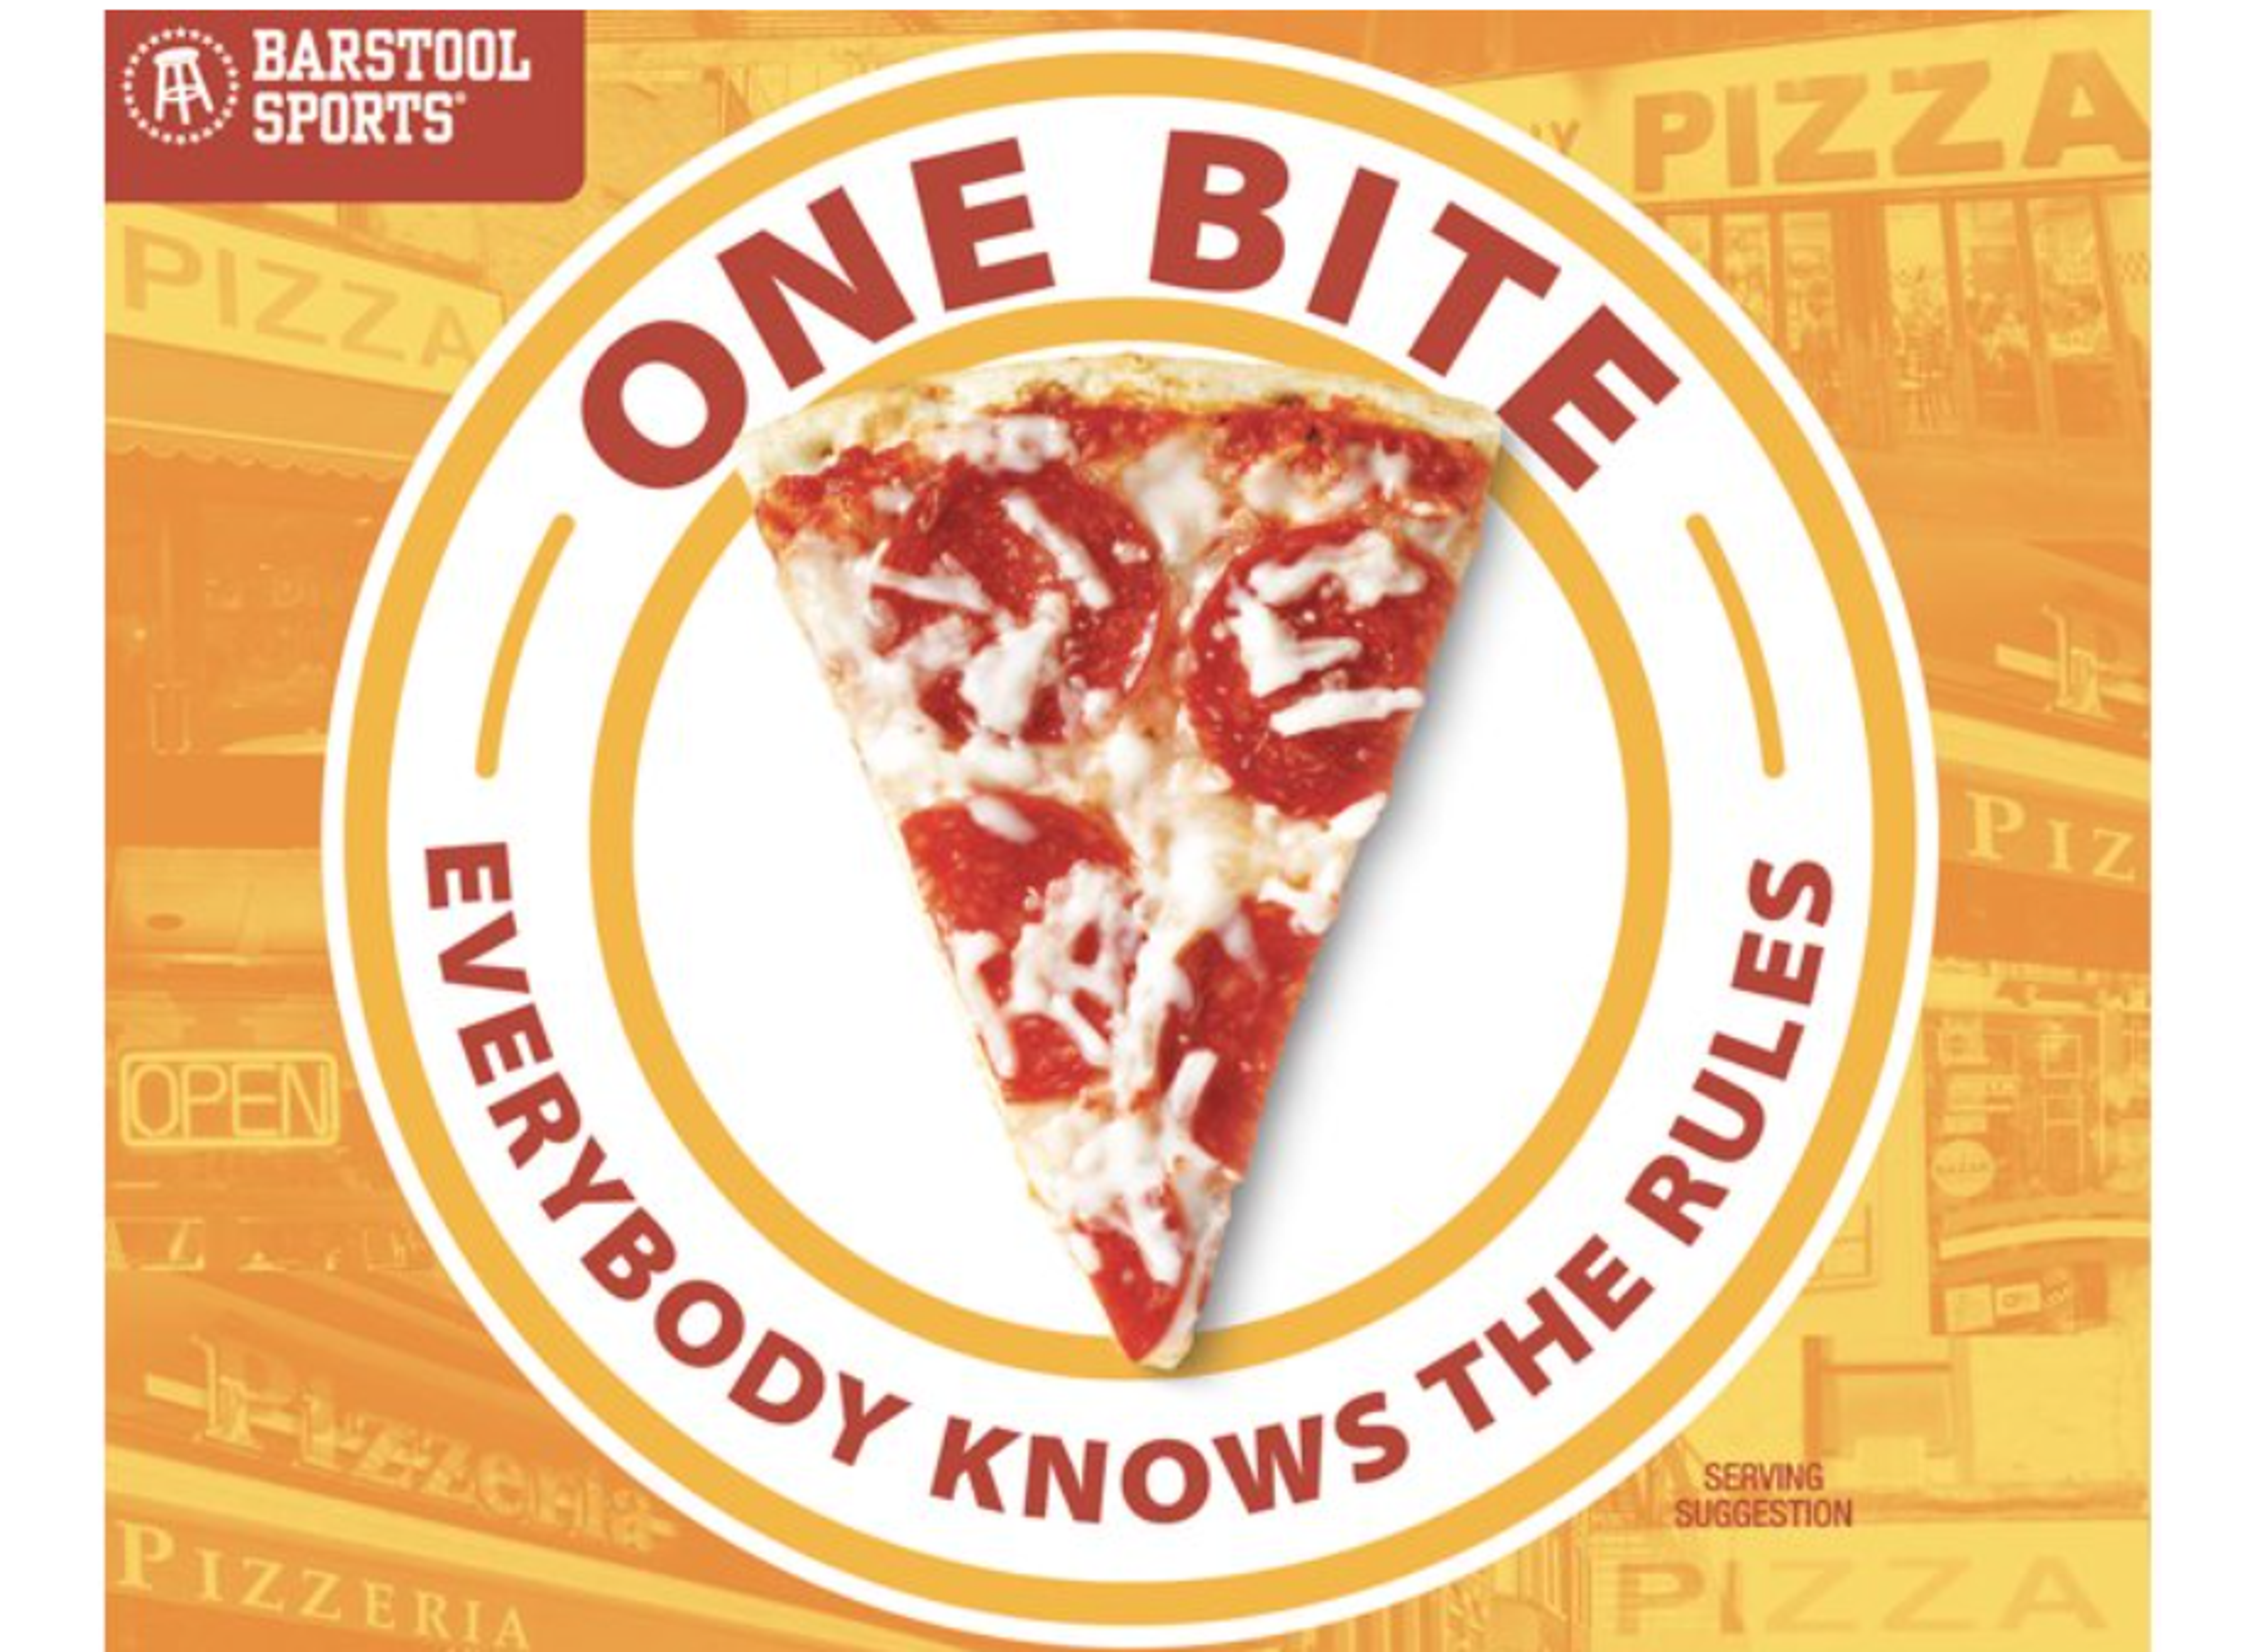 Barstool Sports Reports Record One Bite Pizza Sales Following Dave Portnoy Allegations